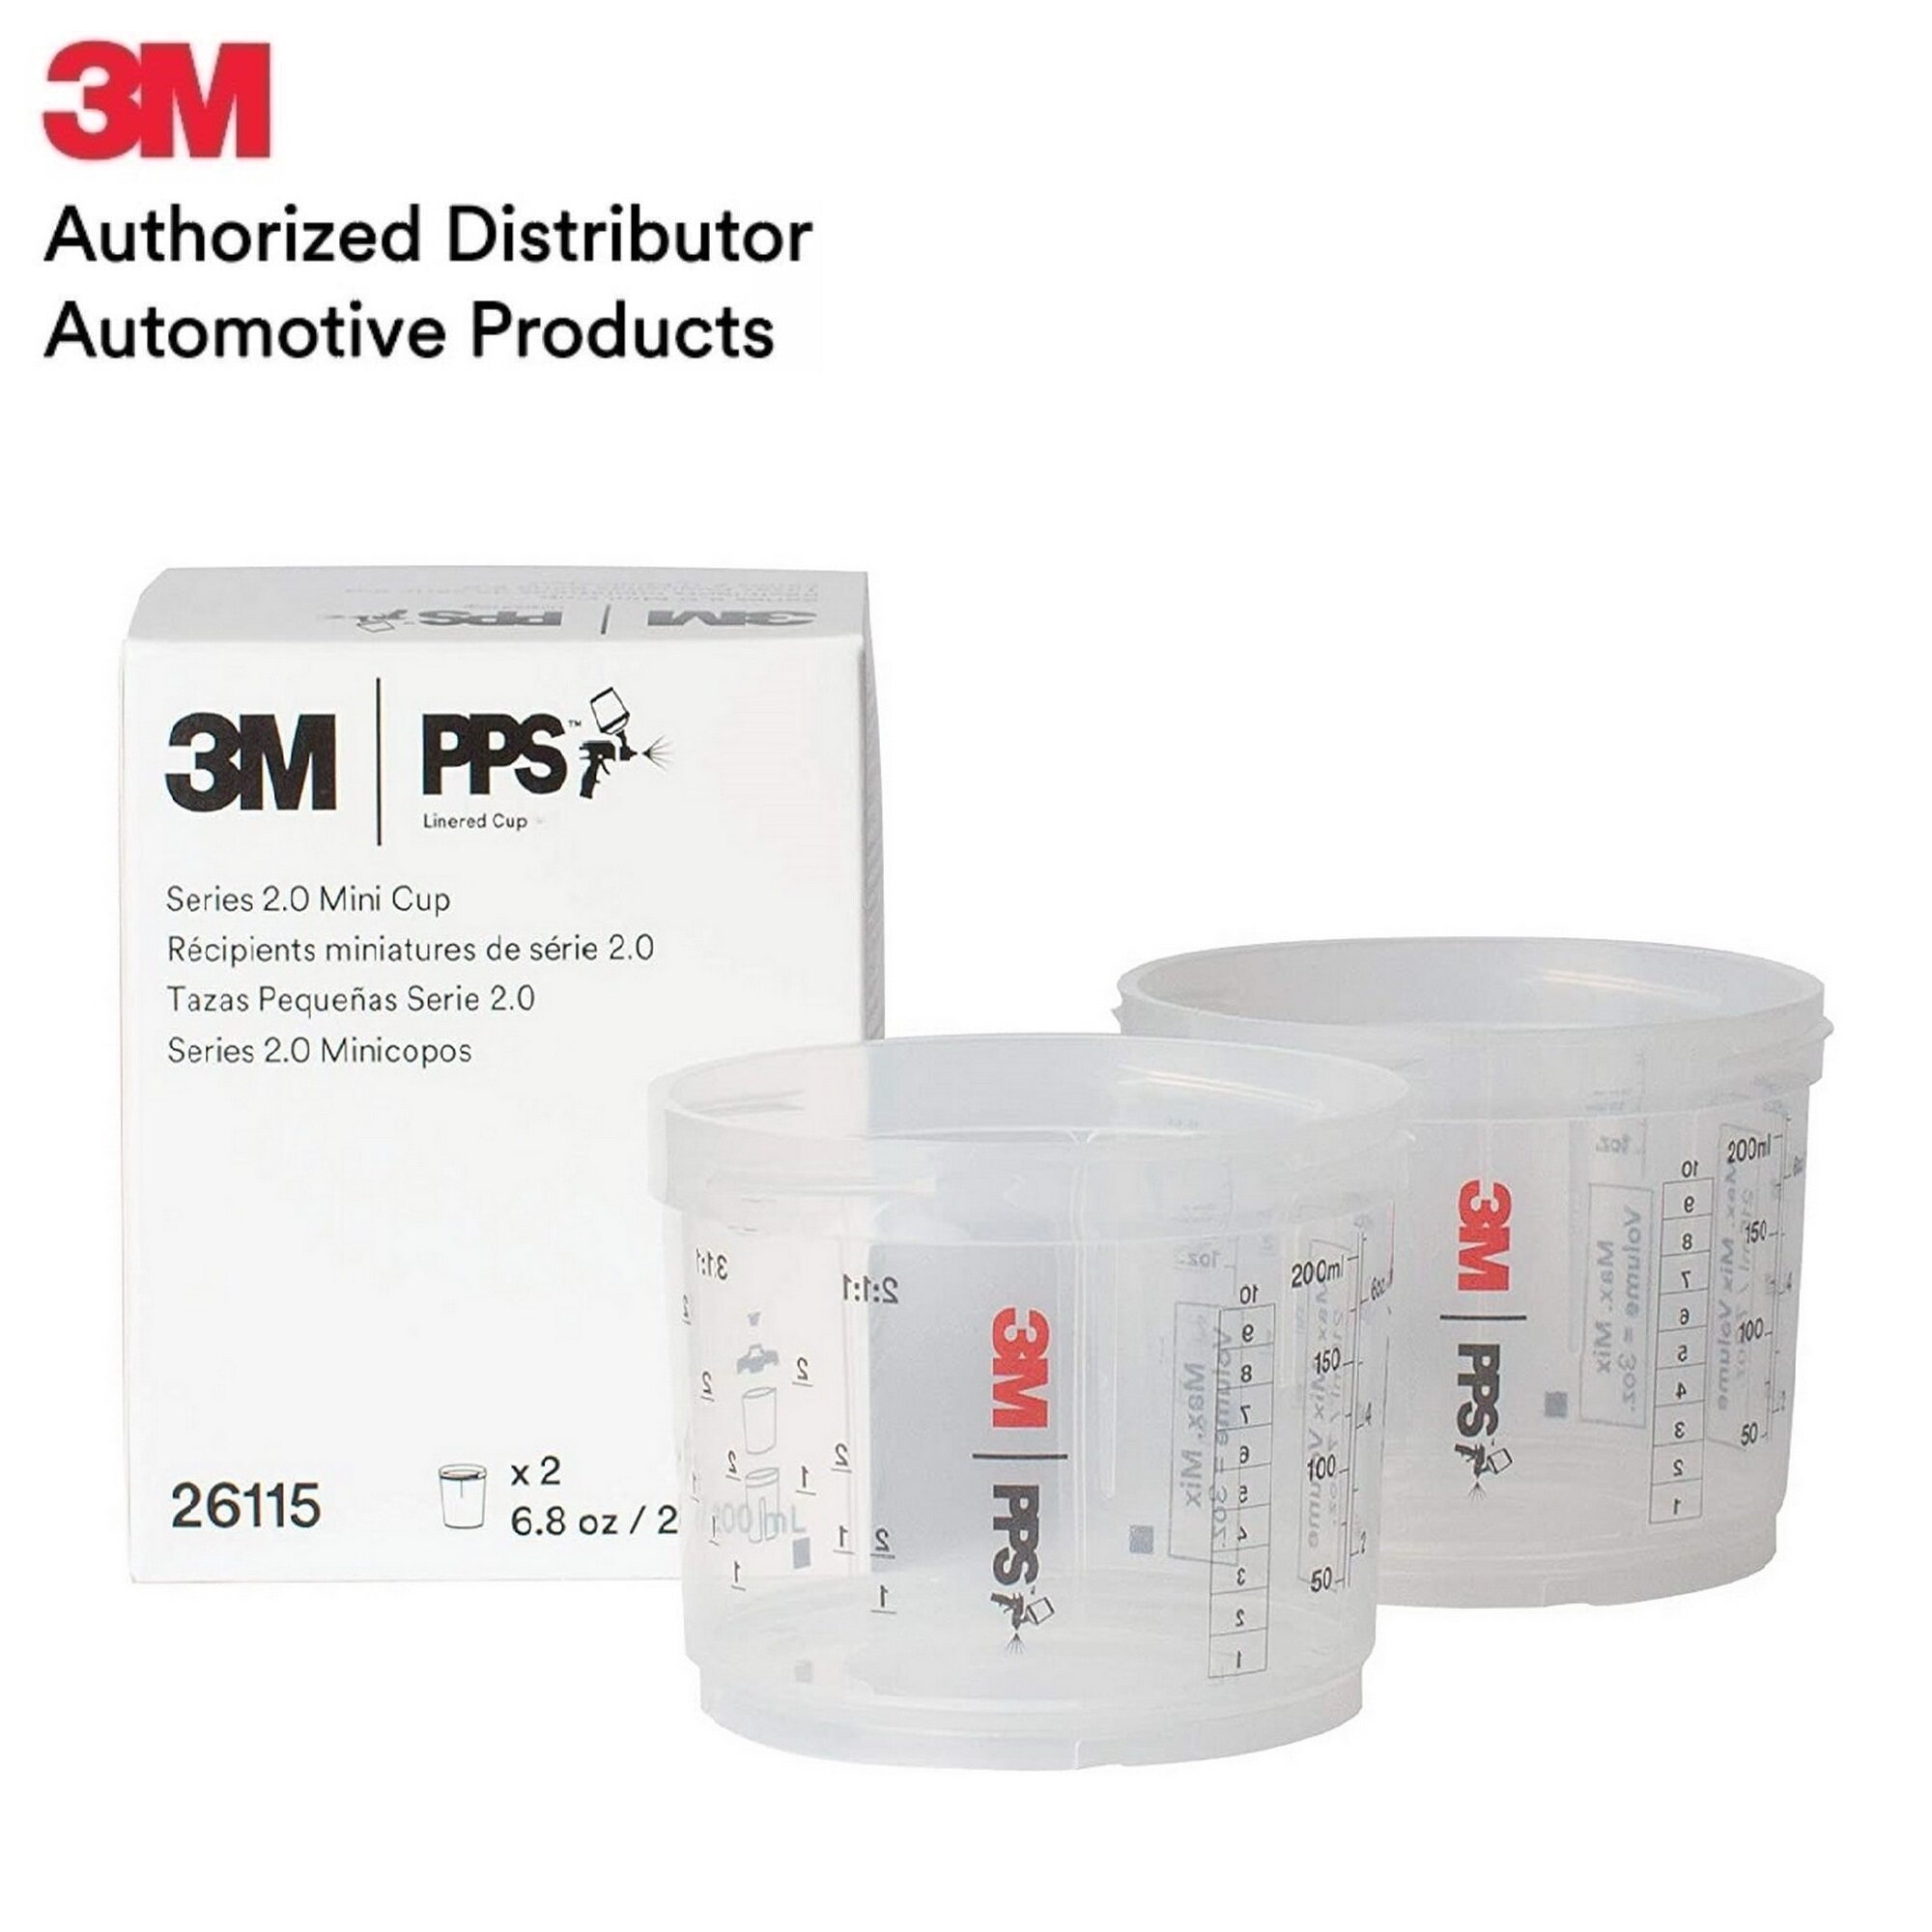 3M PPS 2.0 Spray Gun Cups, 26115, Mini, 6 Ounces, Use with Paint Gun and  PPS 2.0 Lids and Liners to Paint Cars, Furniture, House and More, 2 Pack